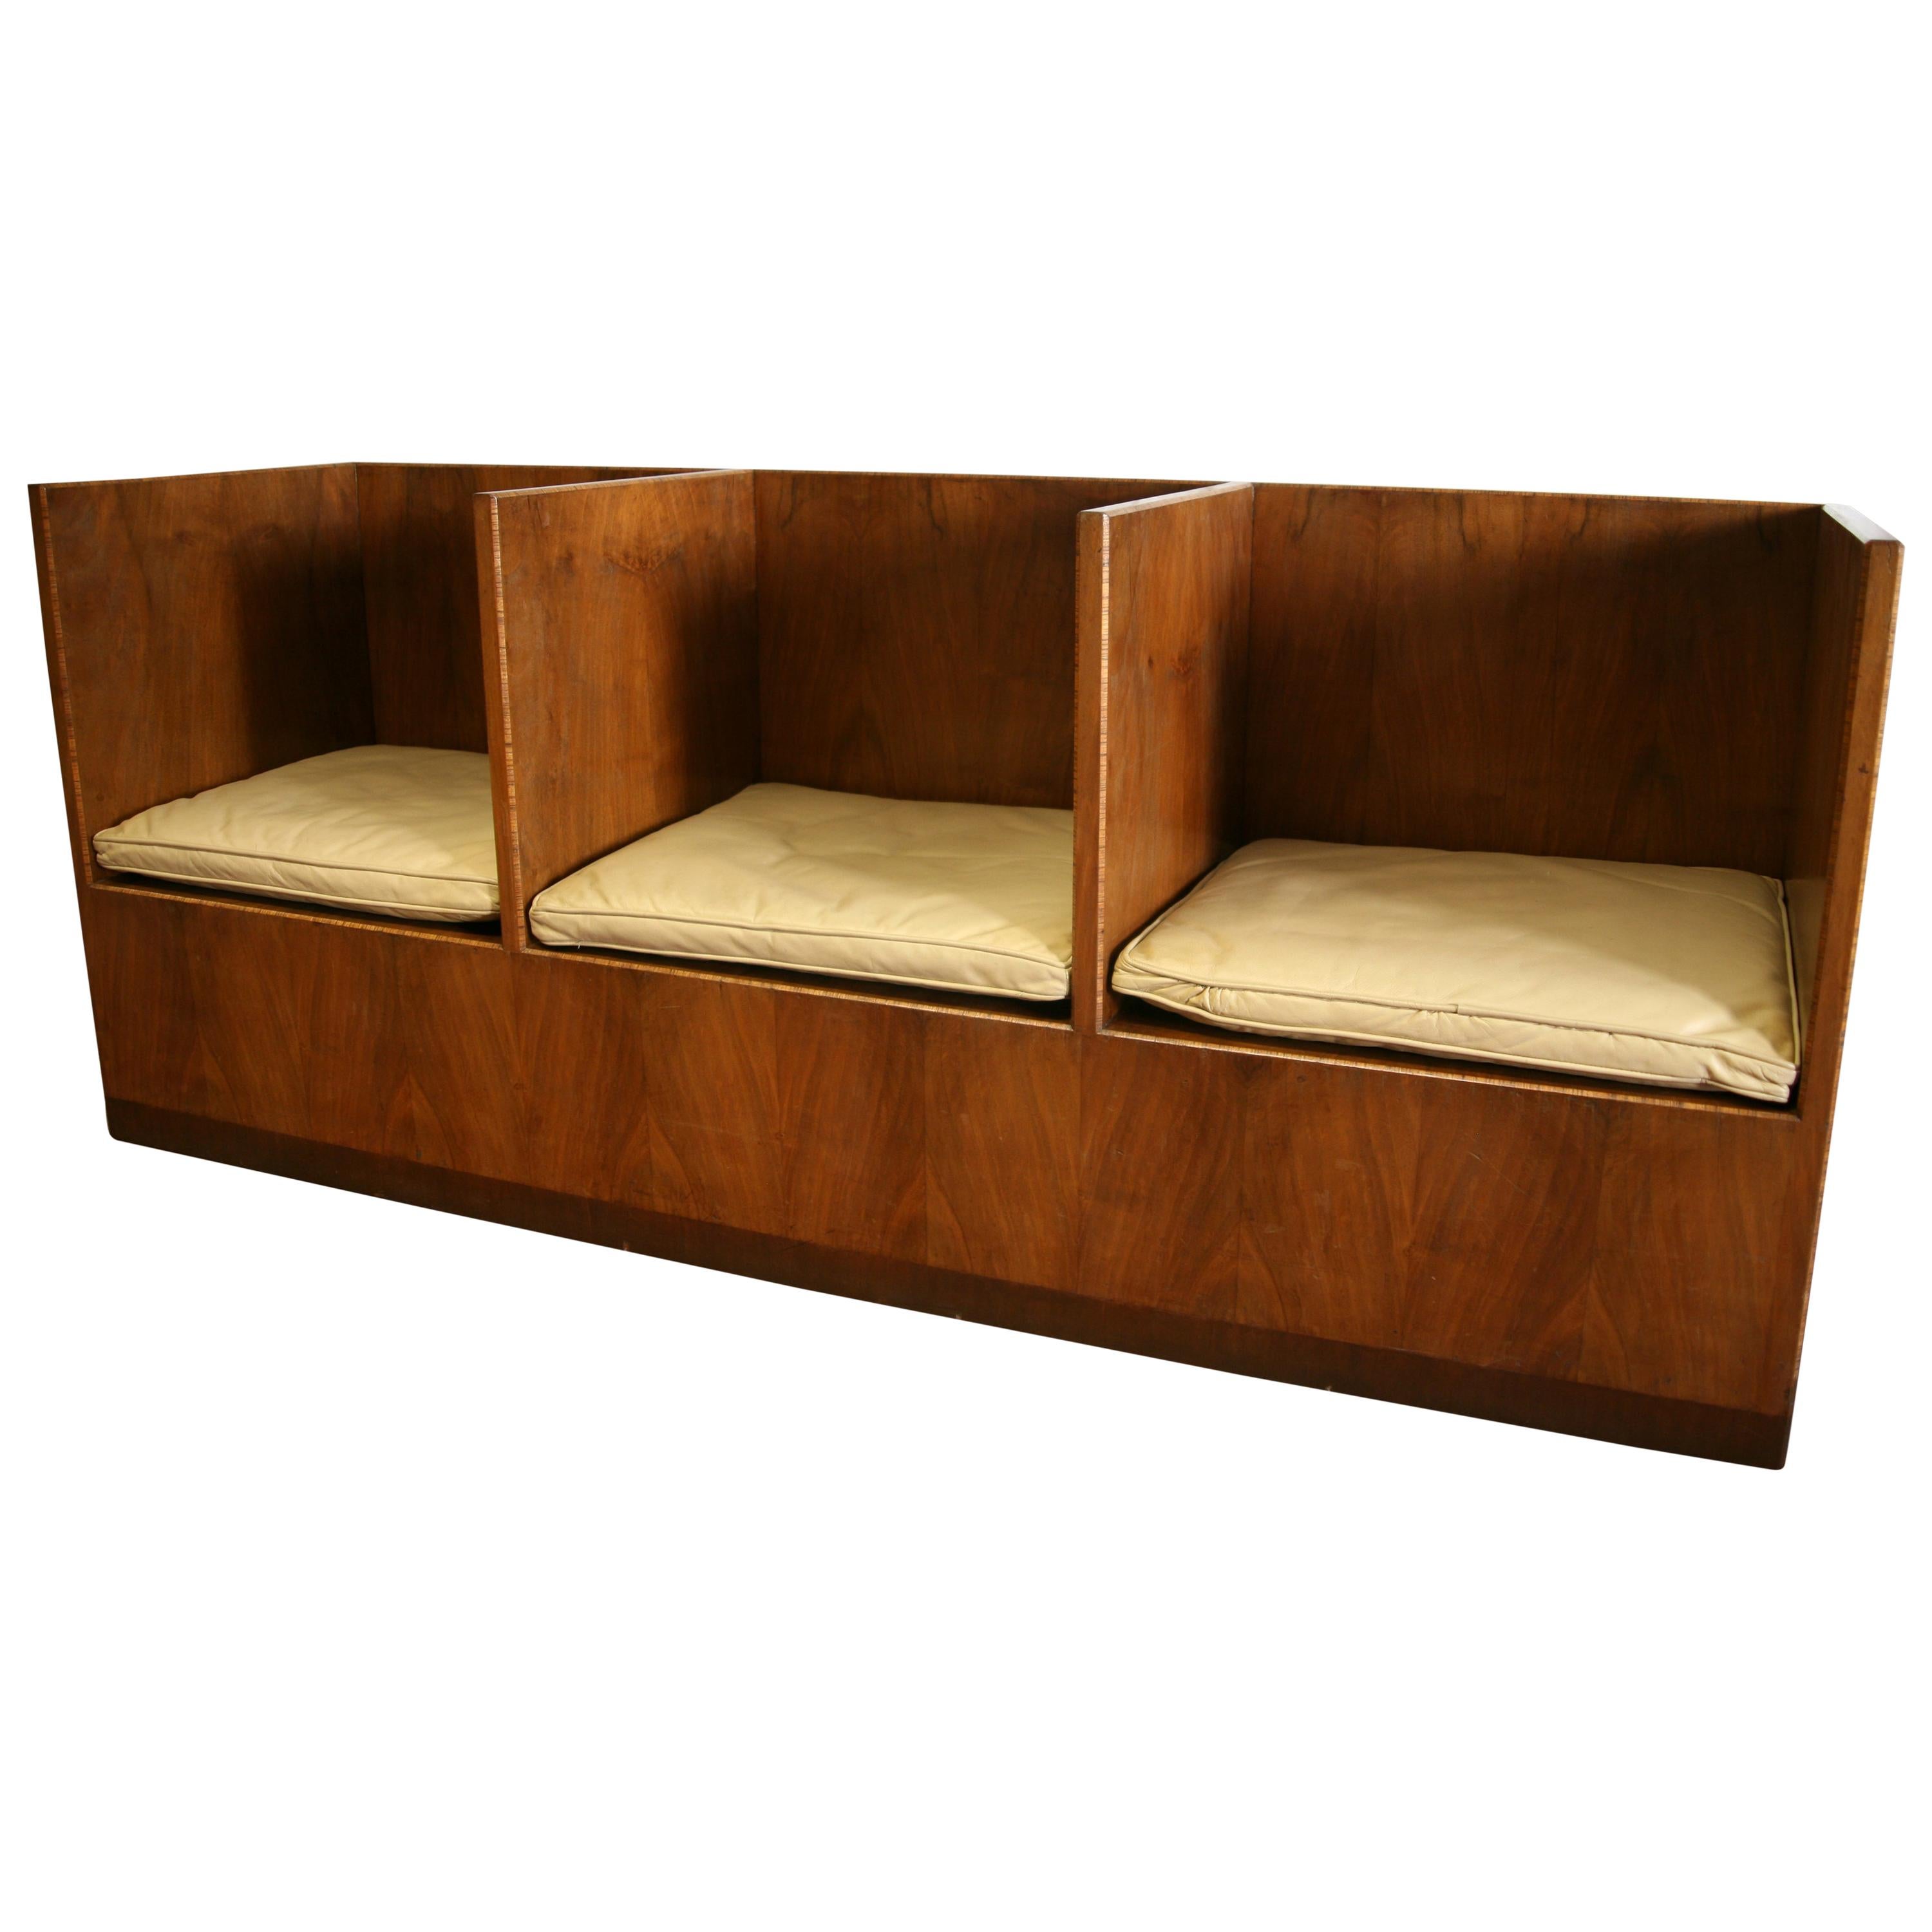 Midcentury Triple-Seat Settee Sofa Chair in Walnut Wooden Modern Style Rustic For Sale